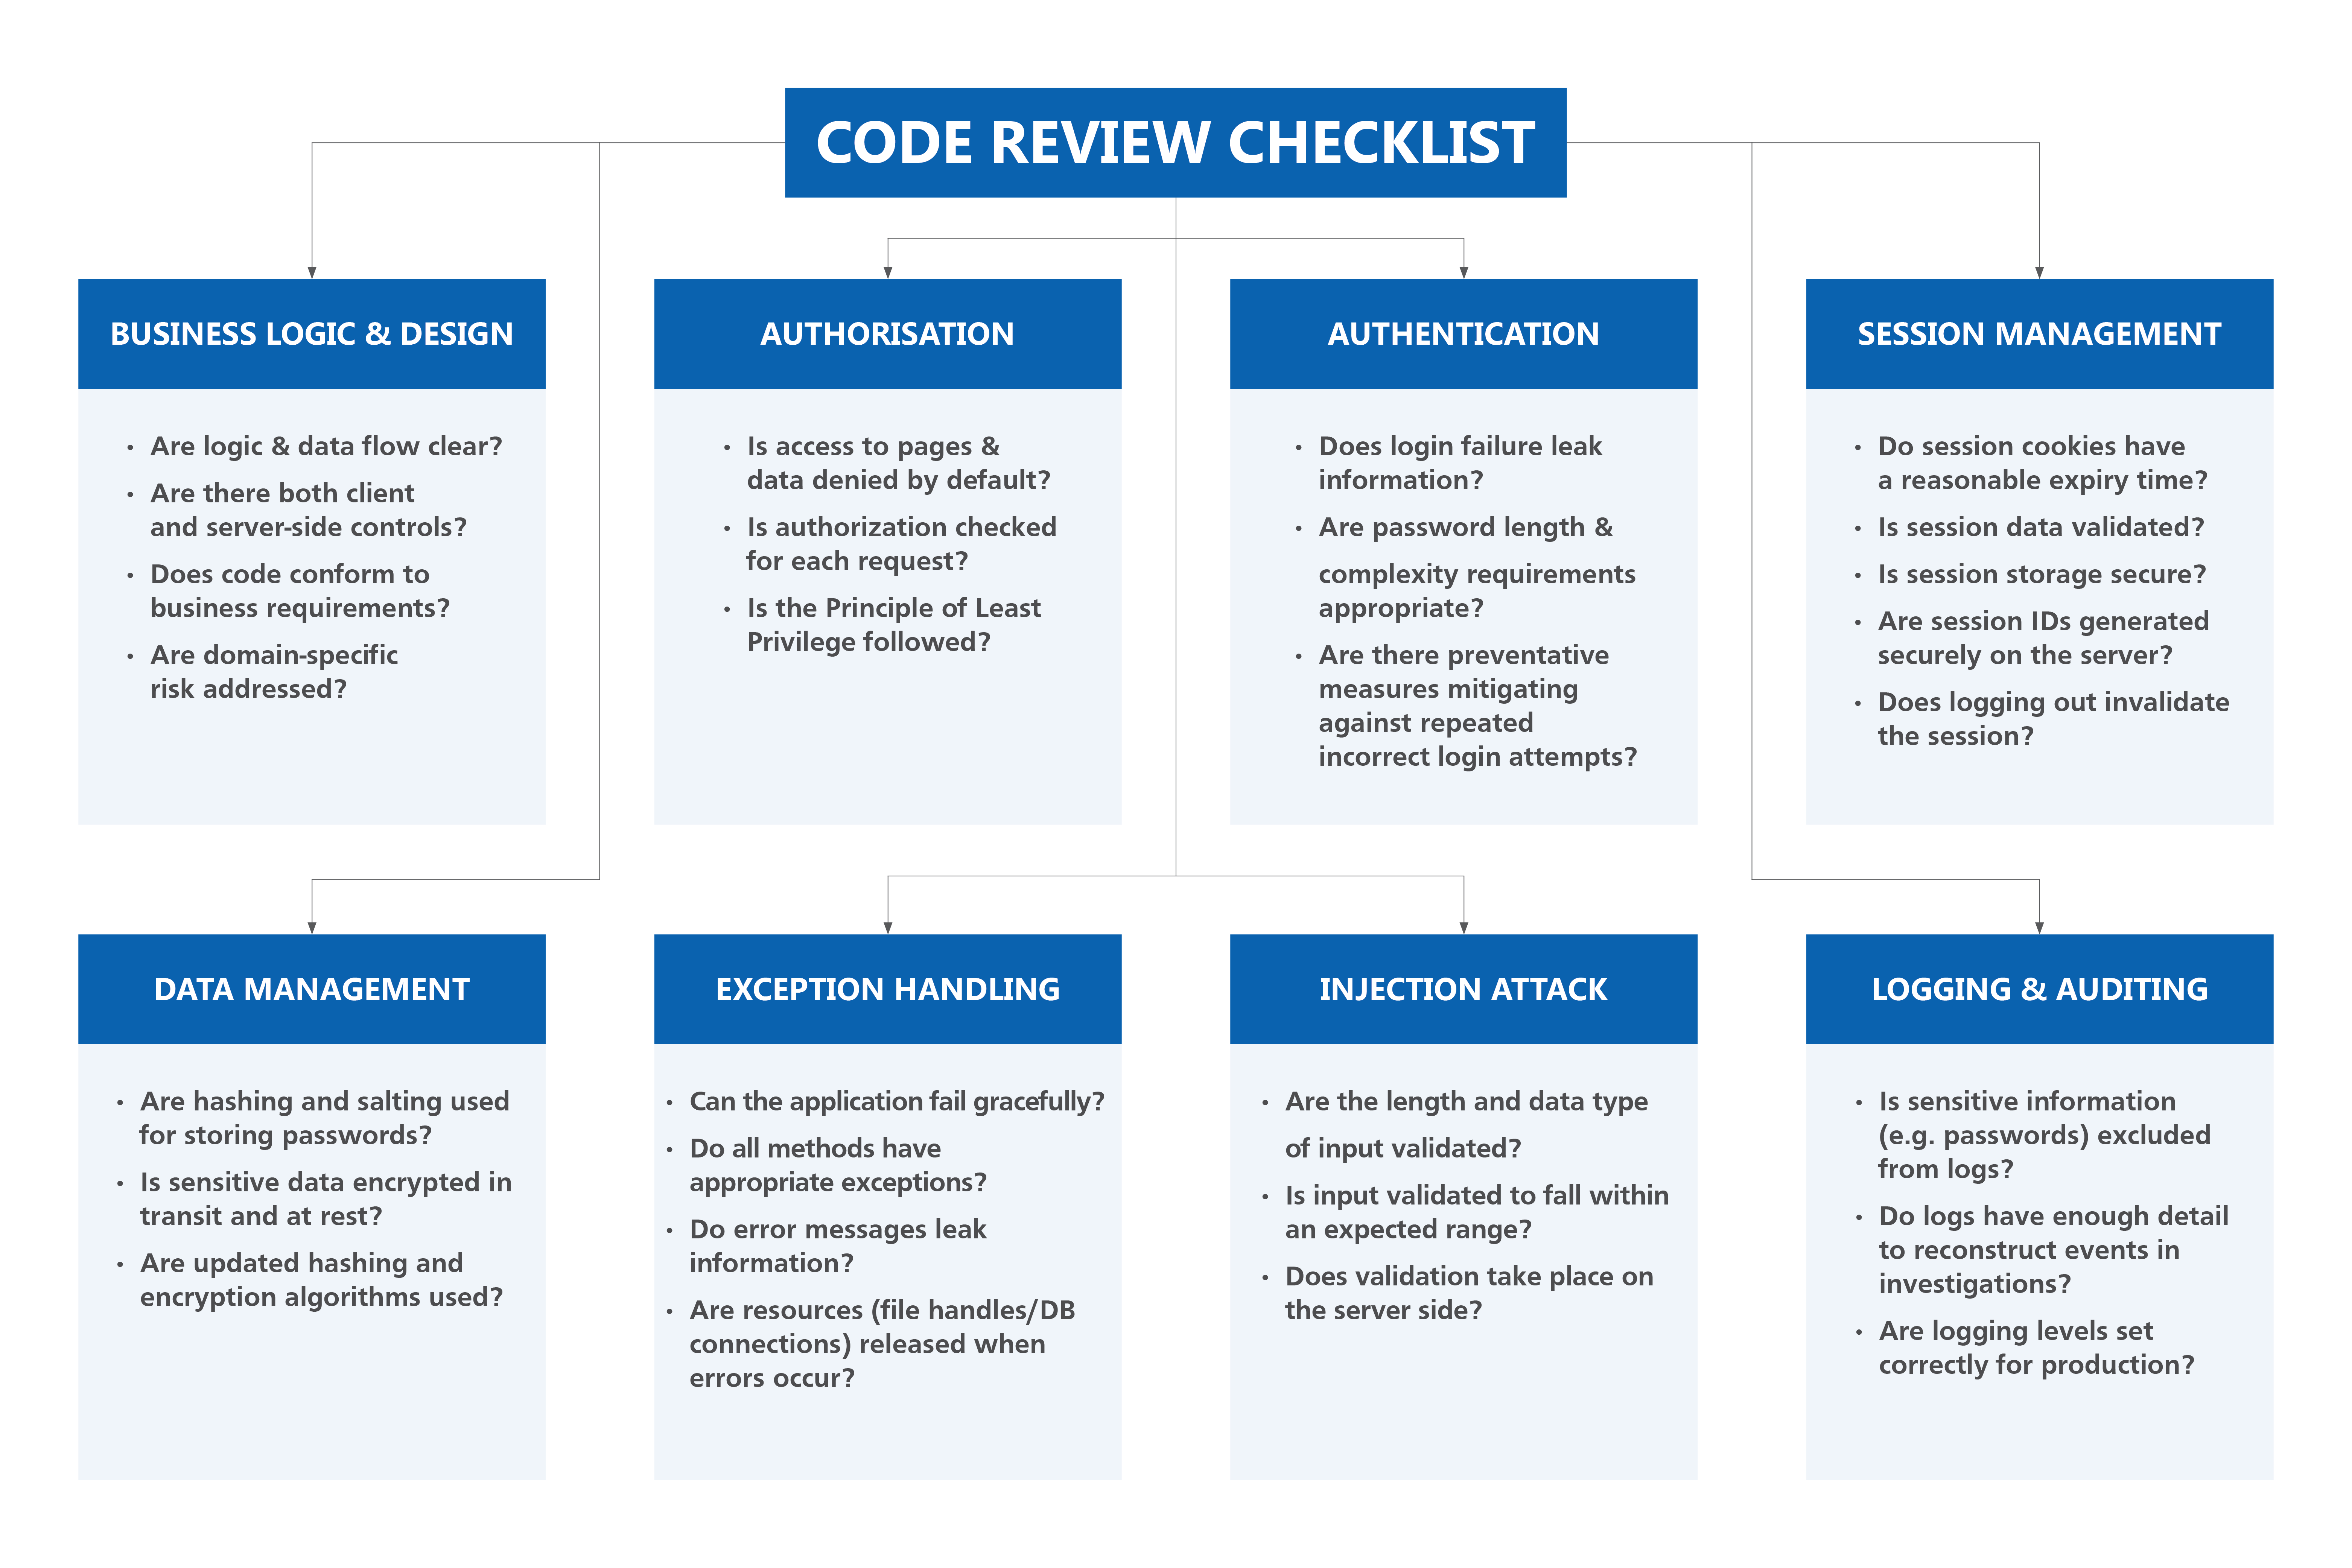 Fig 1: Summary of the secure code review checklist